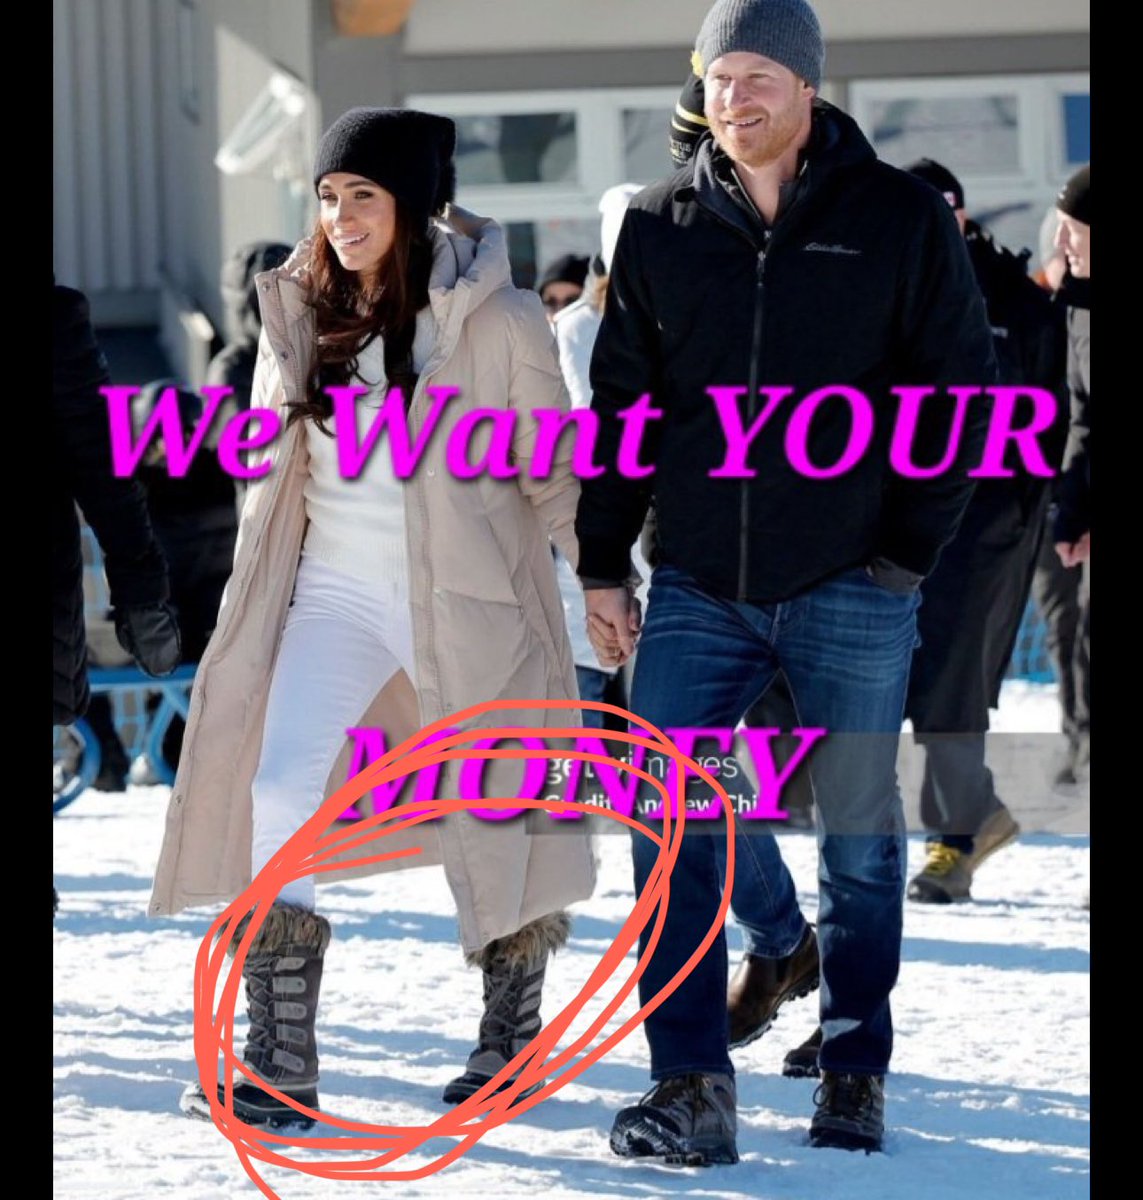 All the money these two have they are wearing the cheapest boots! Or were they expecting Invictus to buy them new clothes there, so they wore their shittiest outfits🤮 it wasn’t enough to cost of the flights😳#InvictusGrift #PrinceHarryAndHisStupidWife